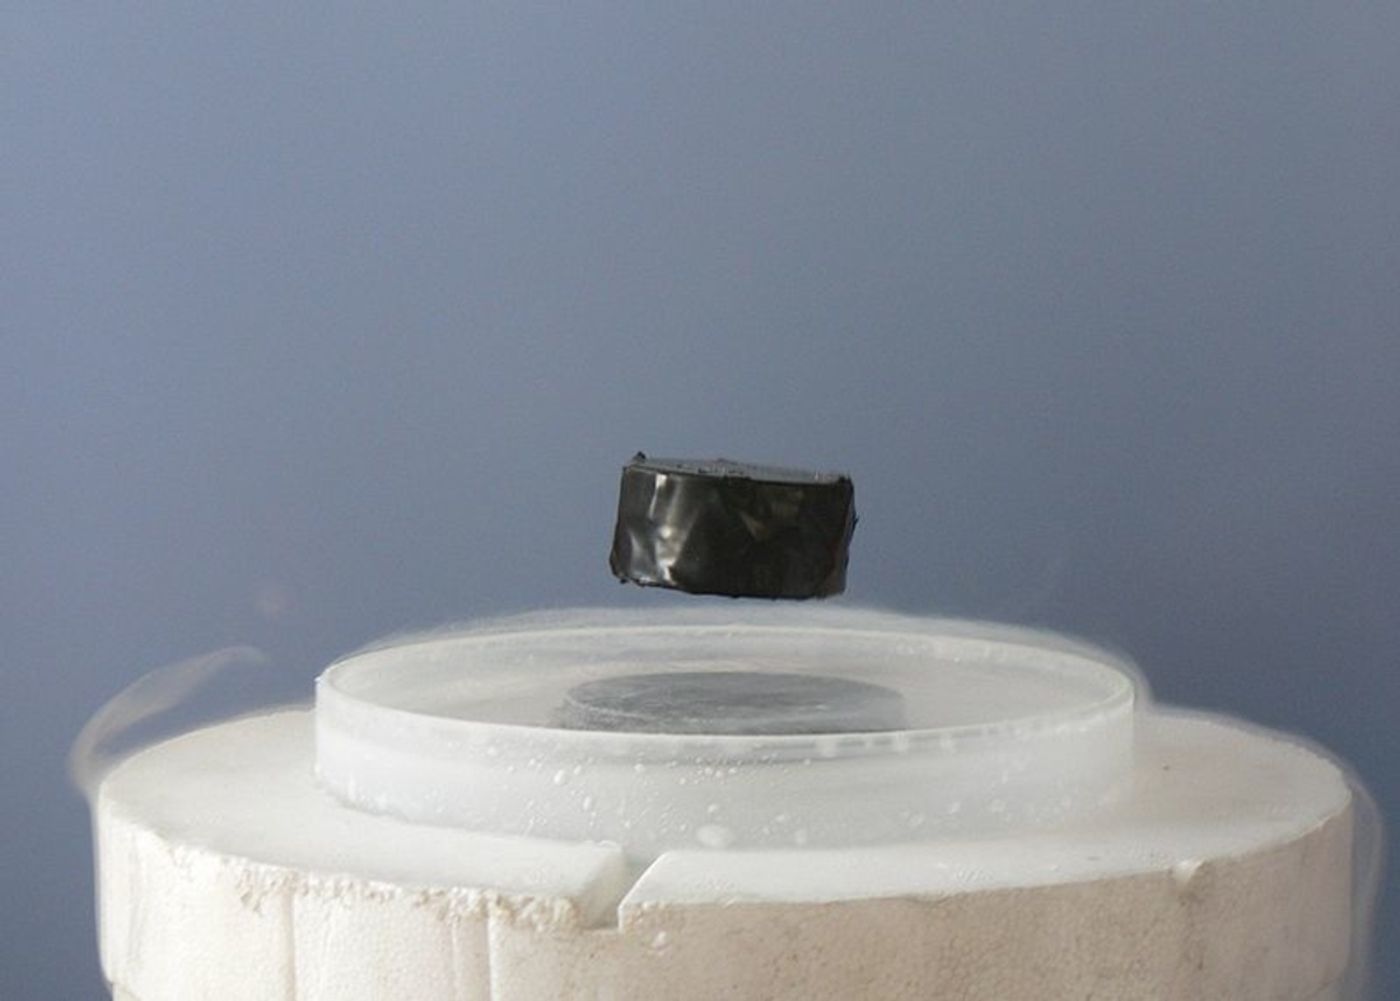 A chilled superconductor levitated over a magnet (Wikimedia Common)